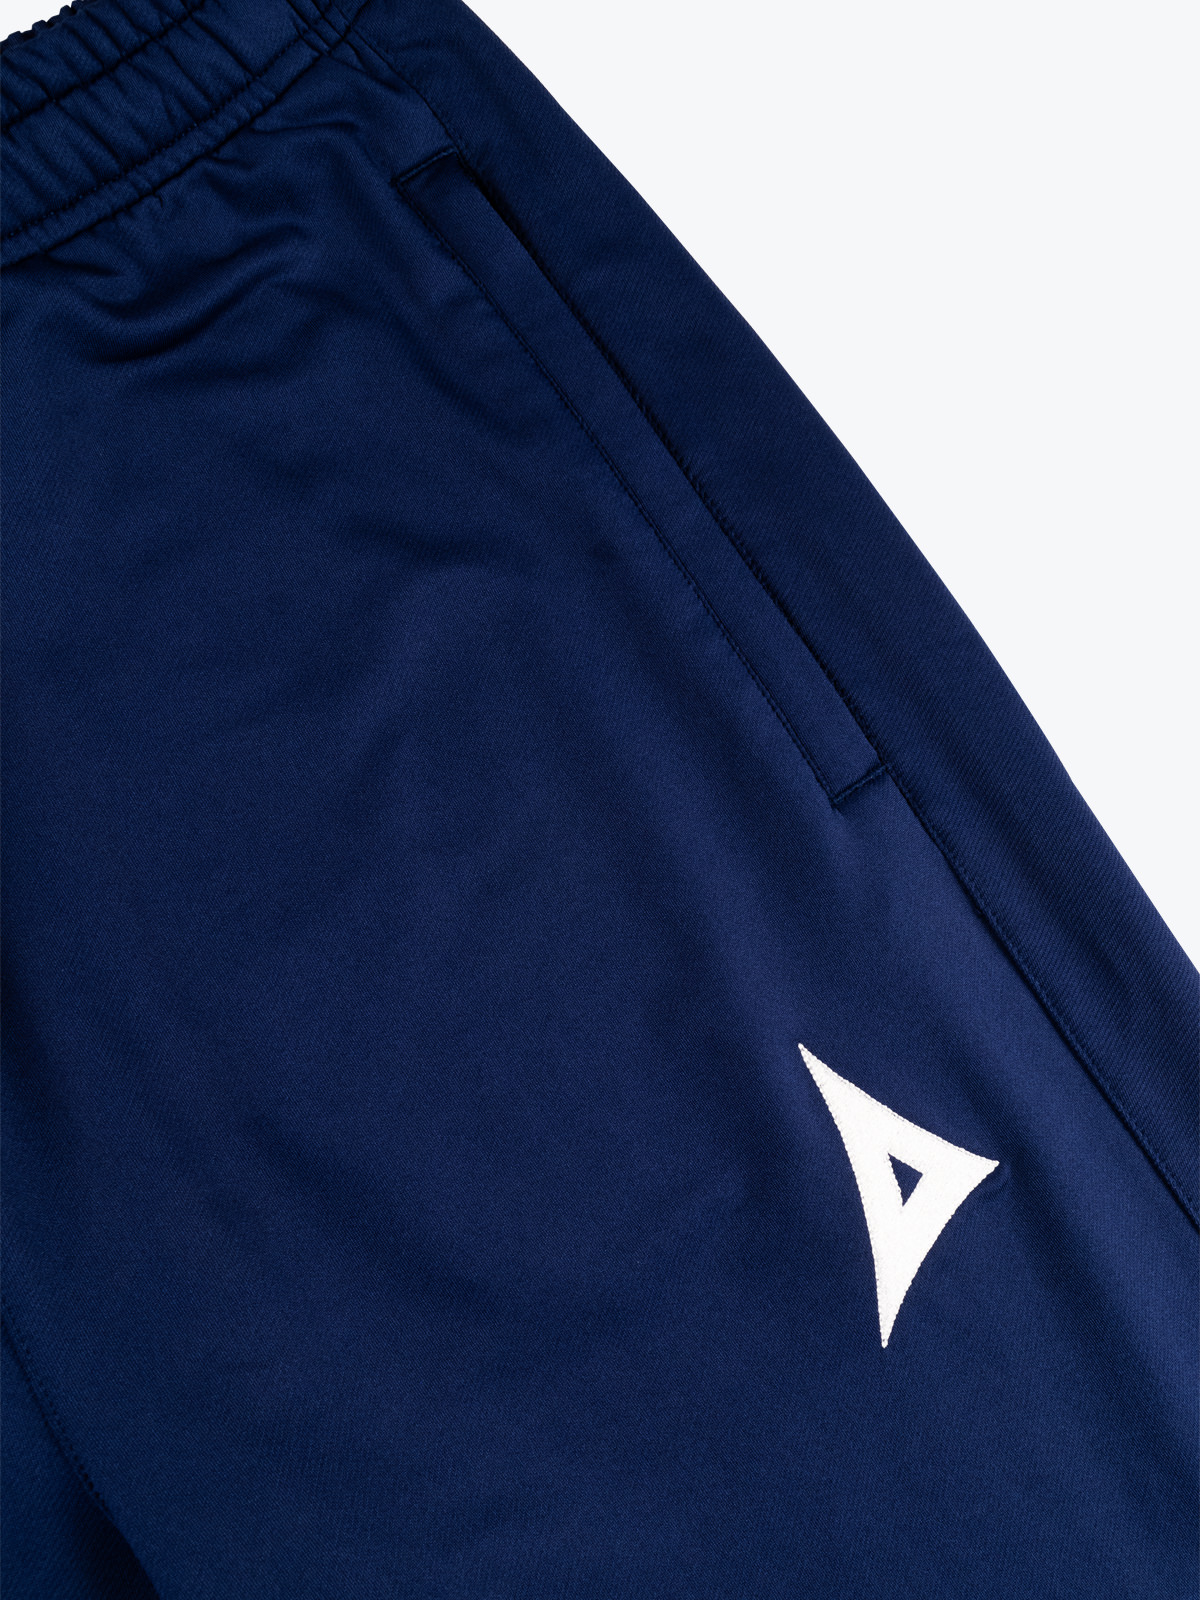 picture of focus 2 tech pant - navy